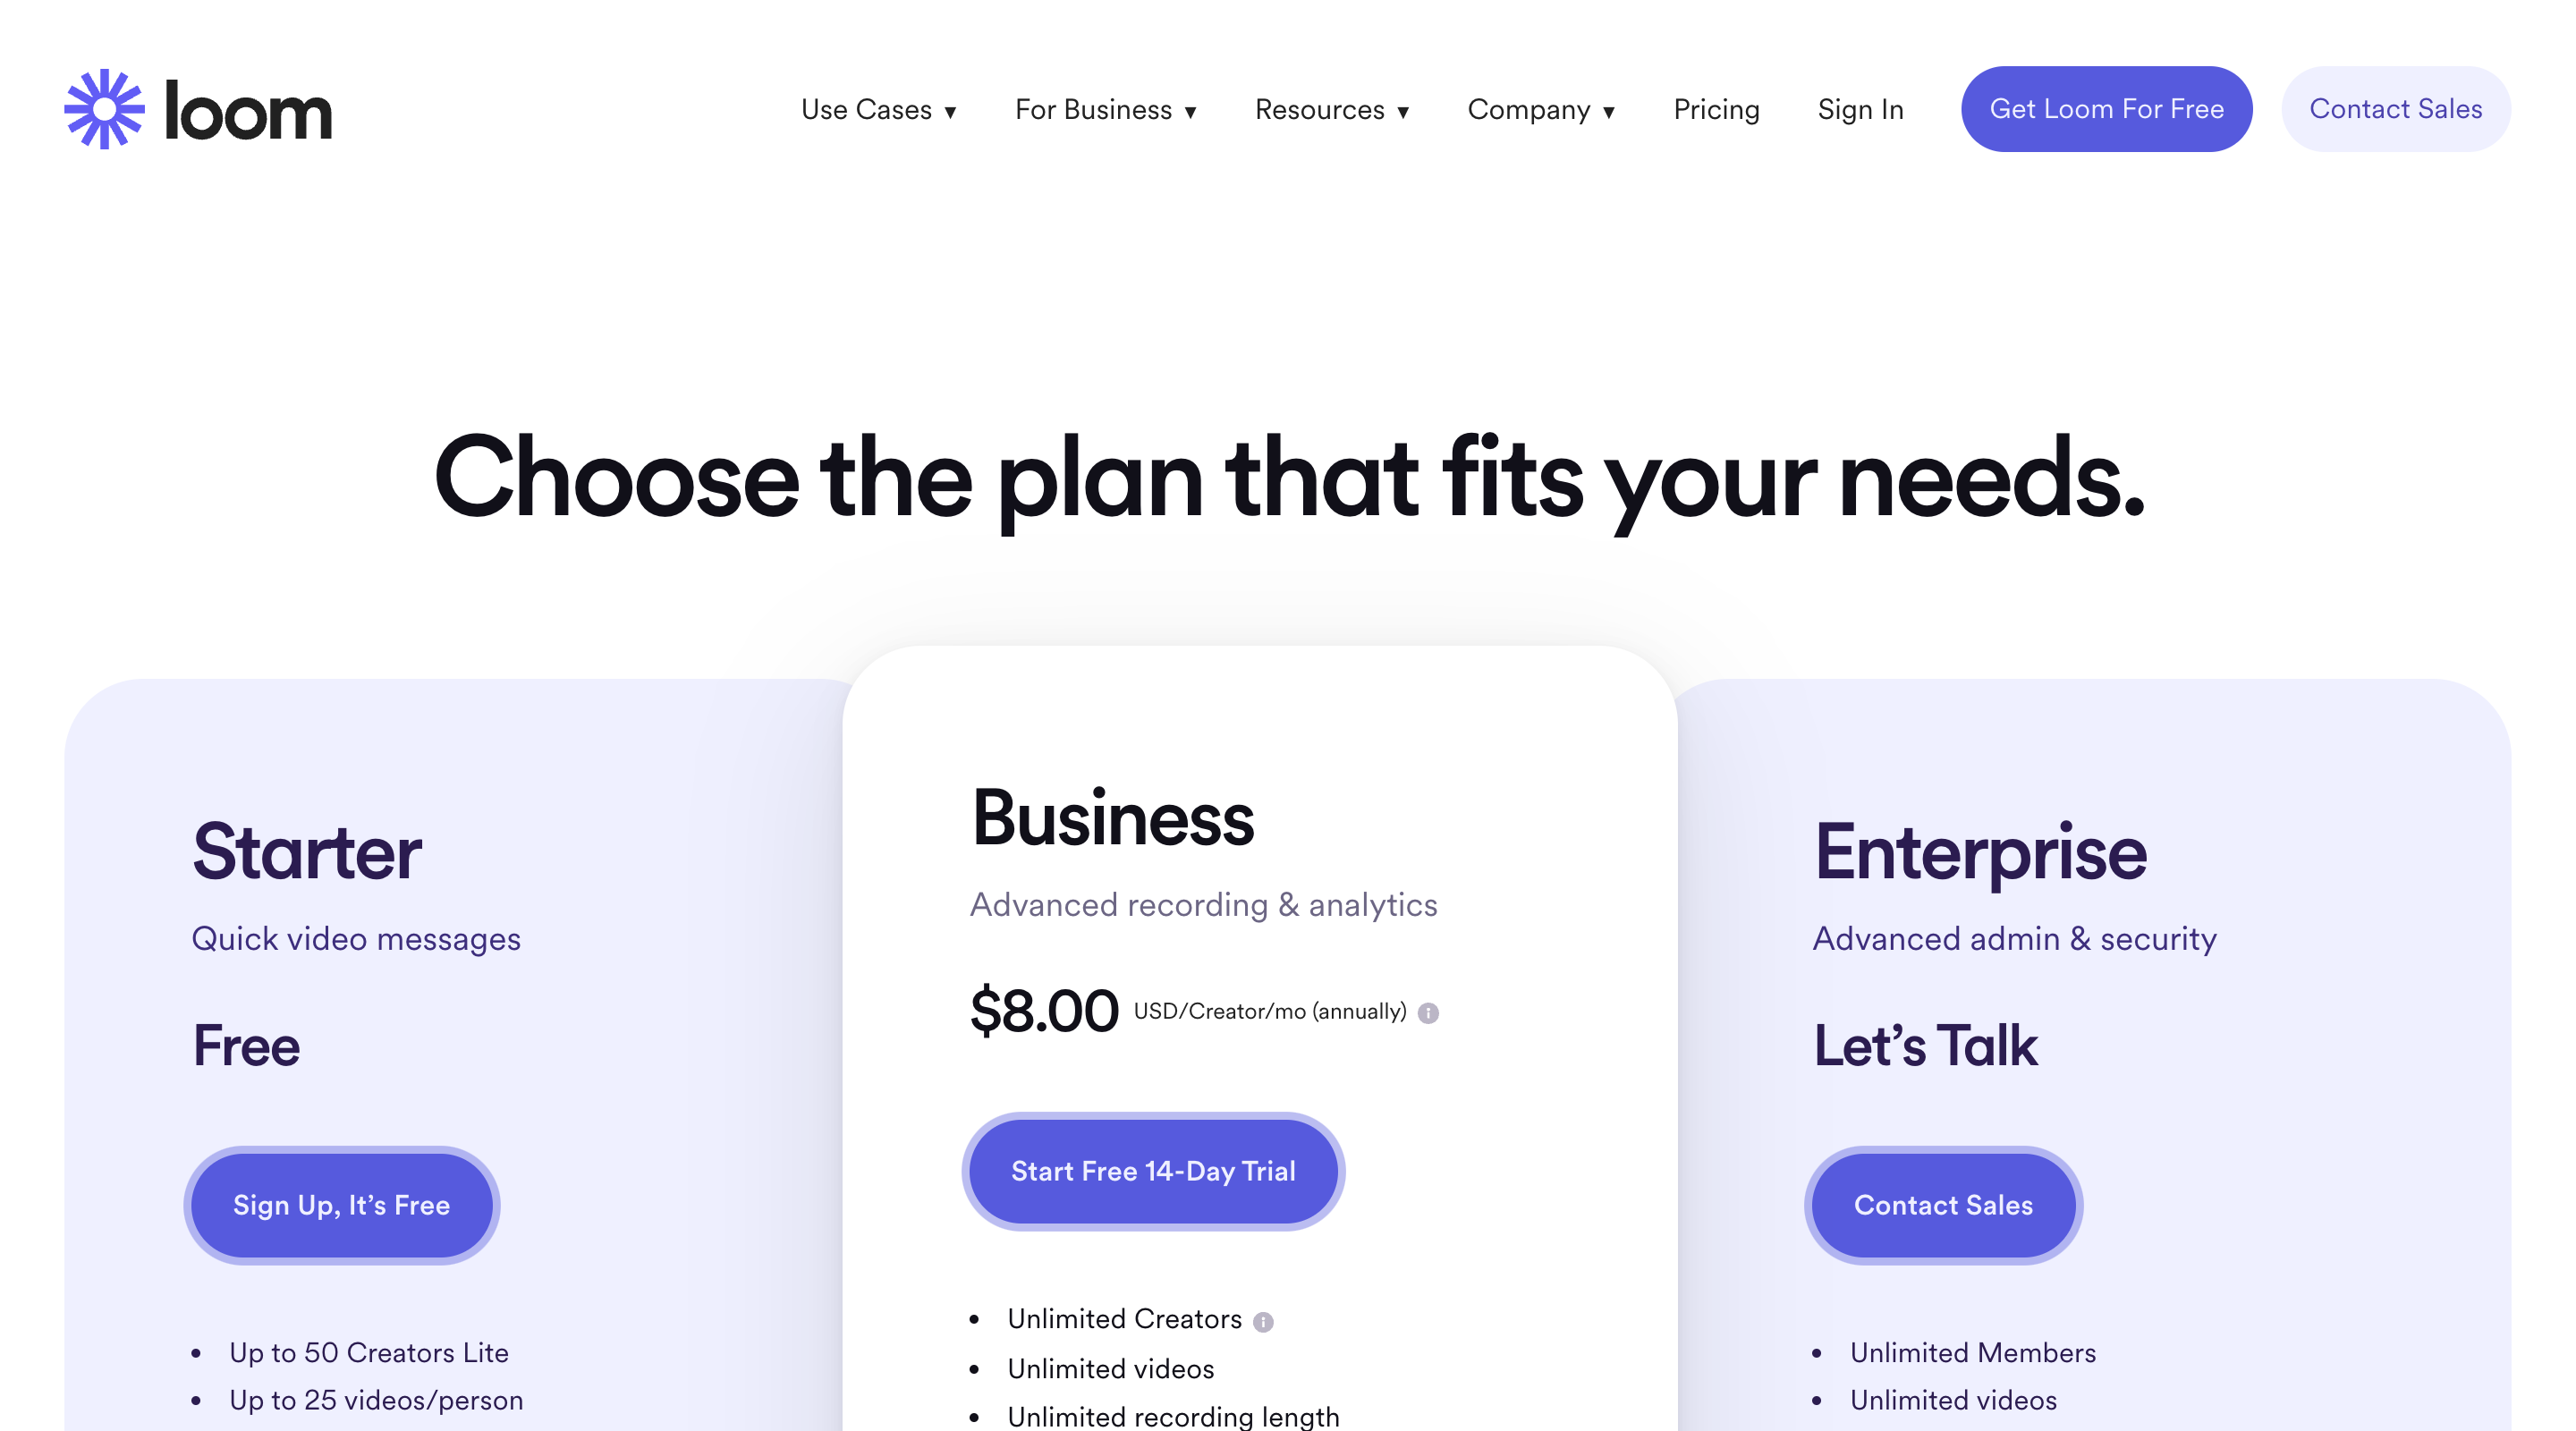 Screenshot of the Loom 'Pricing' page. The header contains the Loom logo, main site navigation, and primary calls-to-action. The three available plans are arranged in a row and each has a price, a feature list, and a call-to-action.